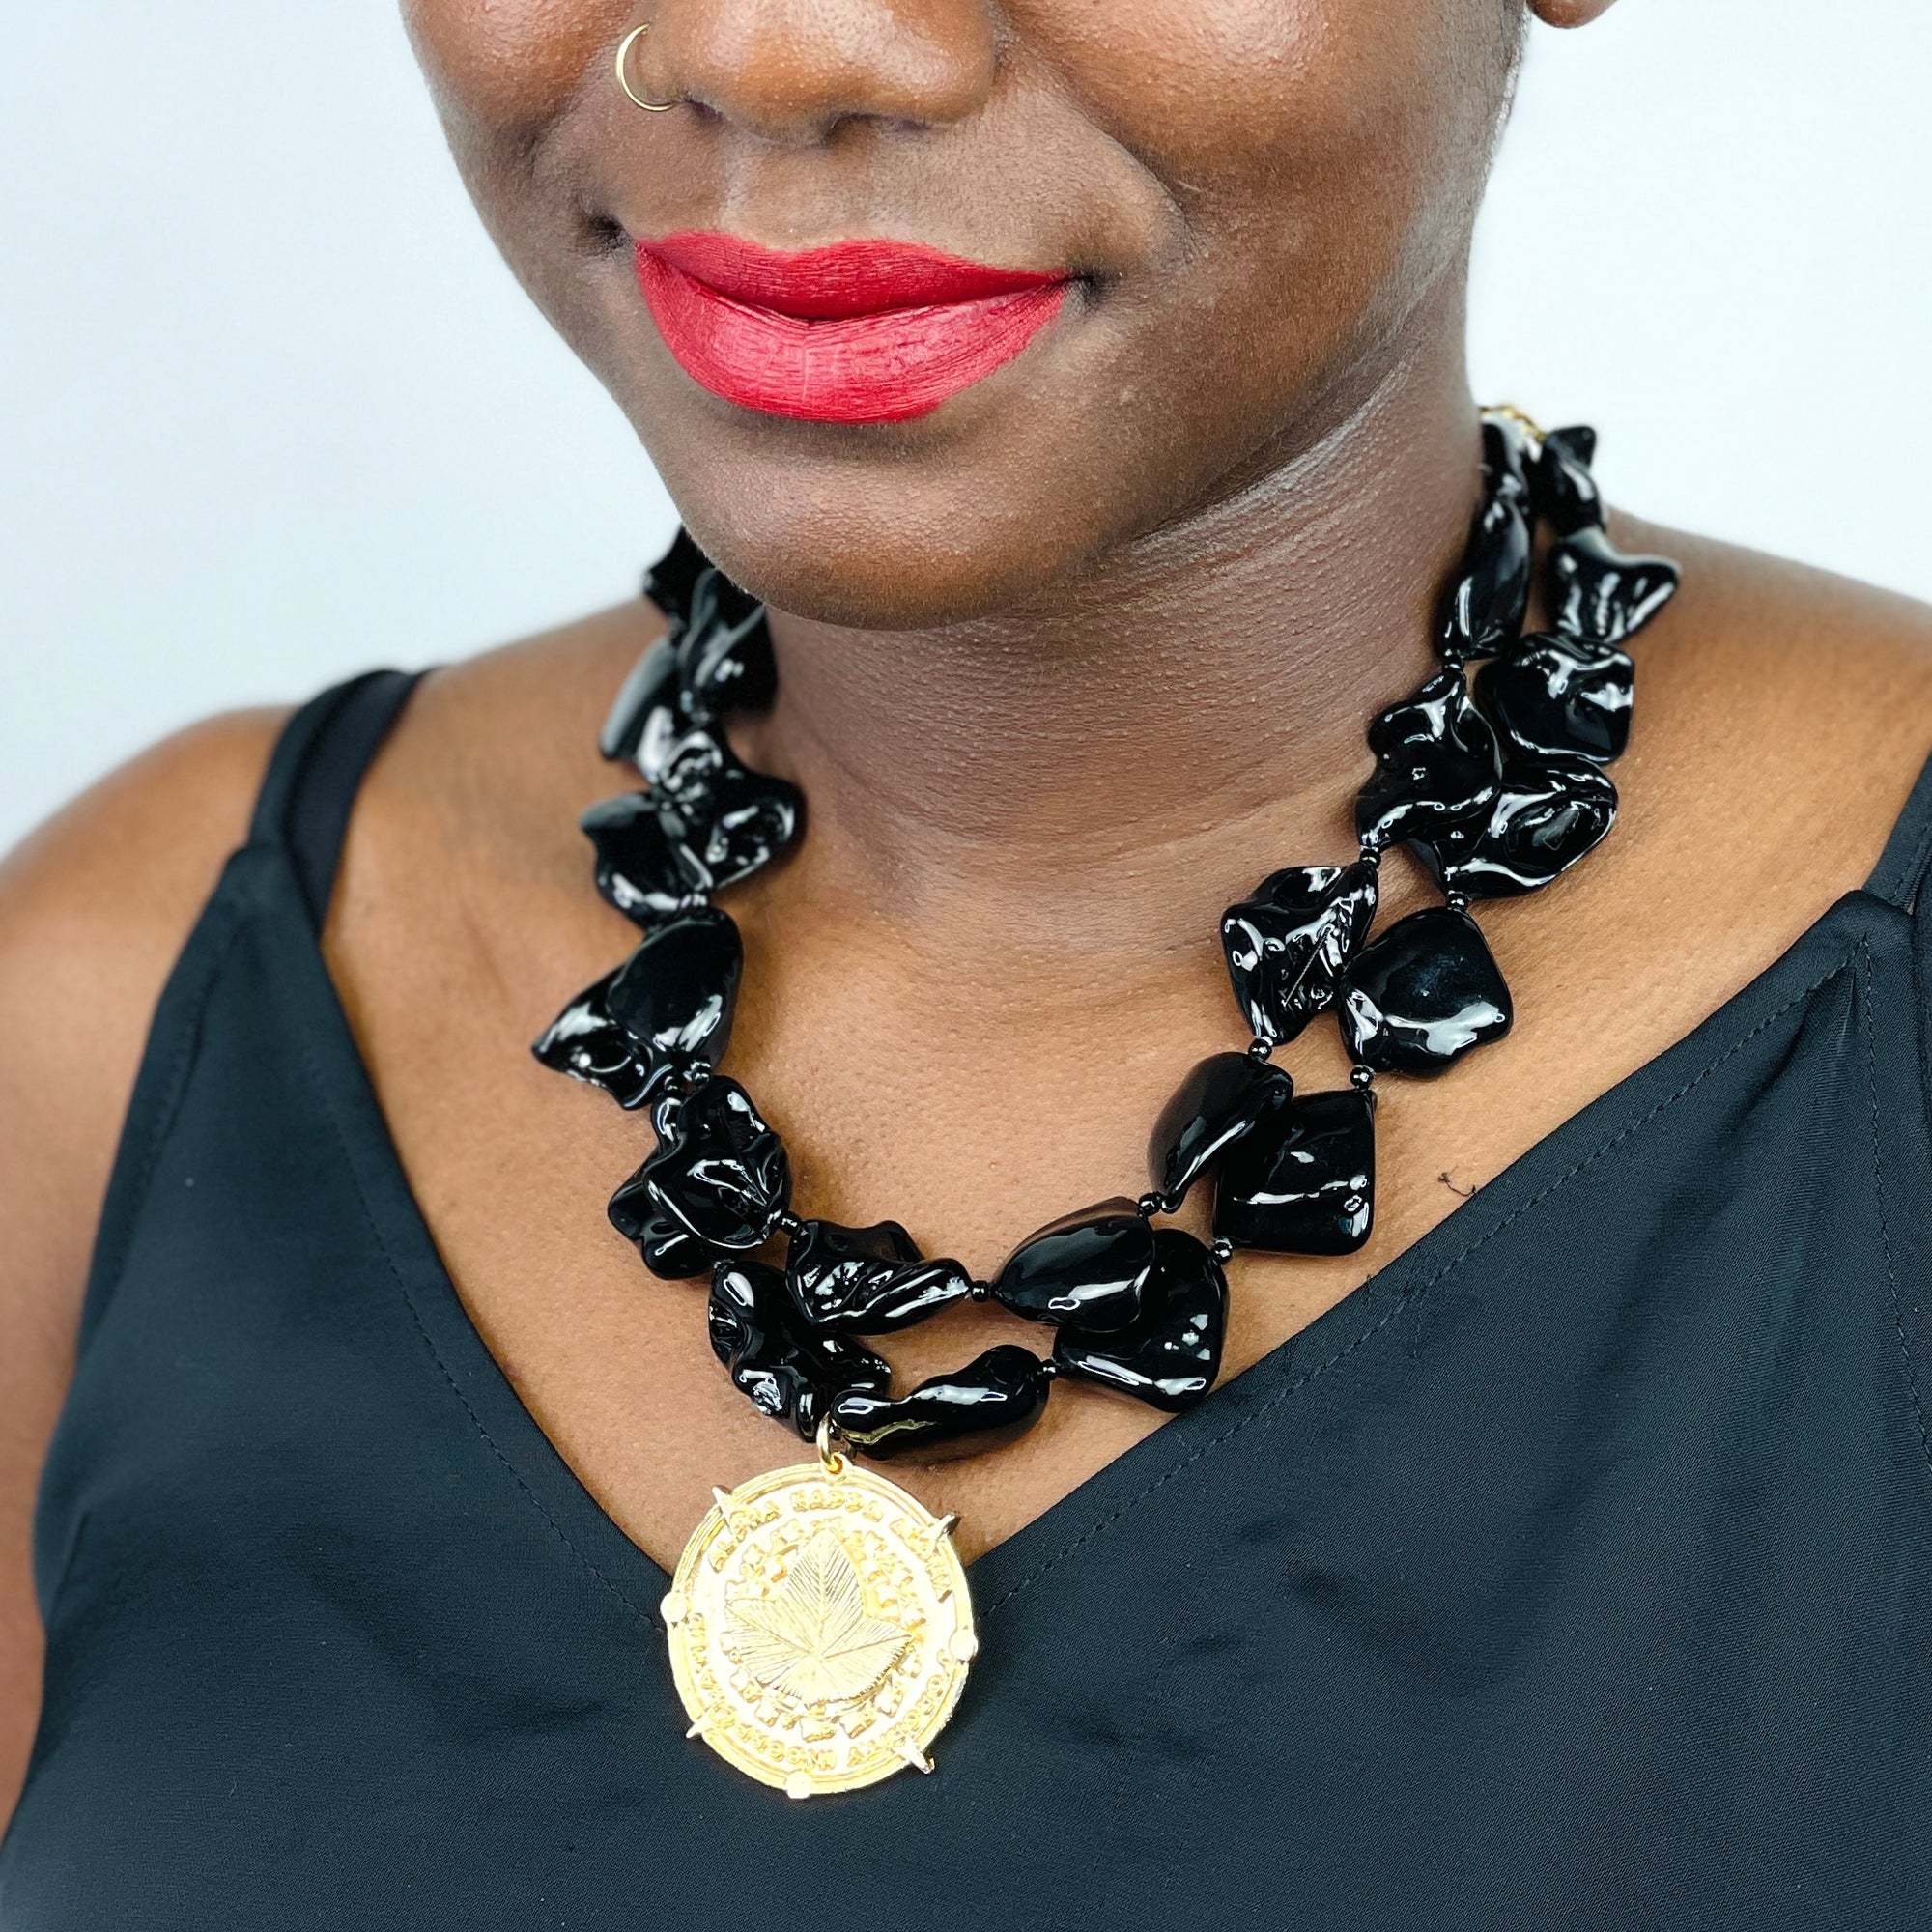 AKA Sable Necklace AKA Necklaces Cerese D, Inc.   